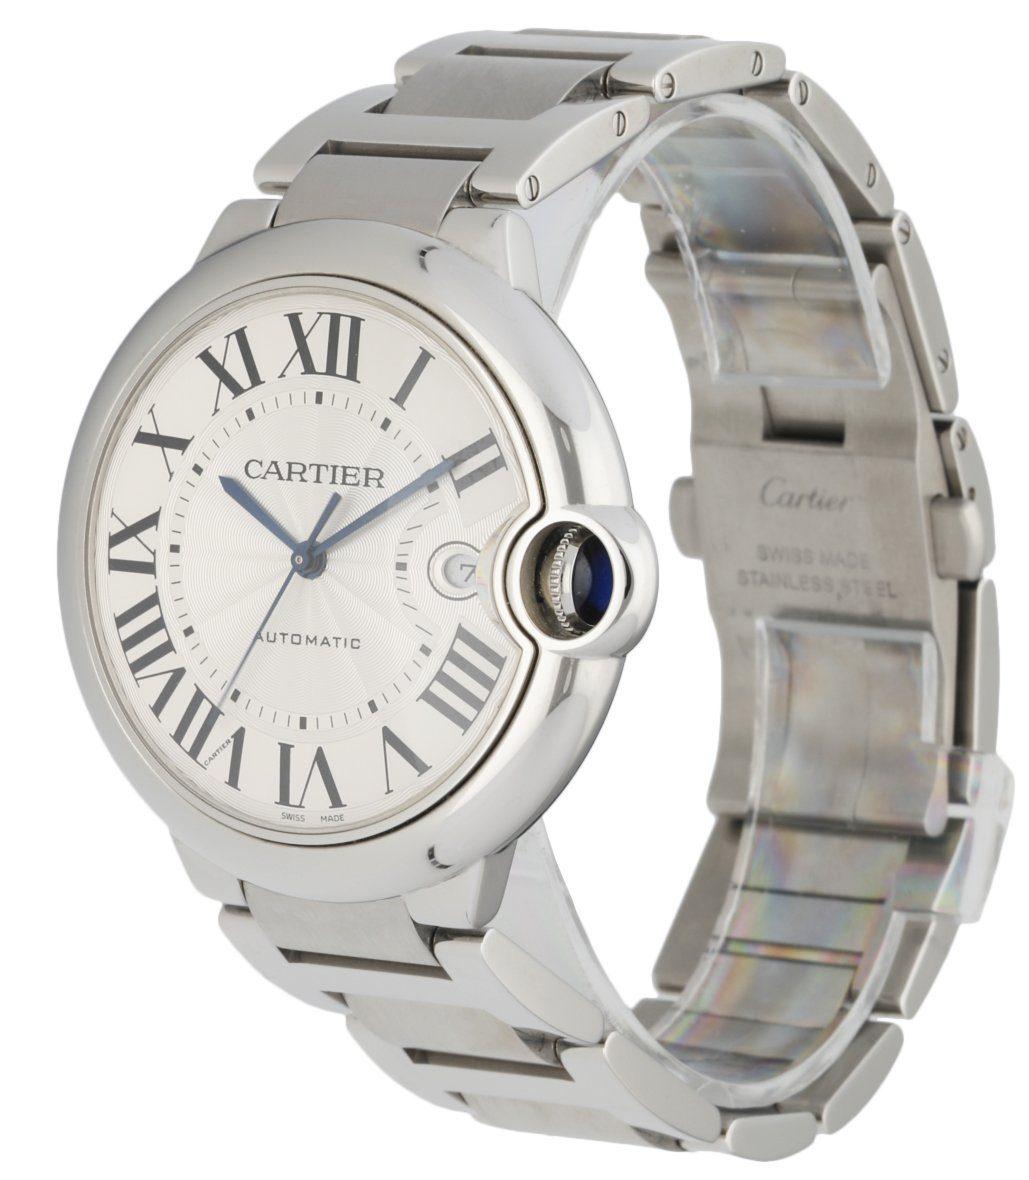 Cartier Ballon BleuÂ 3765 Men's Watch. 42mmÂ stainless steel case with fixed smooth bezel. Silver dial with blue steel hands and Black Roman numeral hour markers. Minute marker around the inner dial. Date display at the 3 o'clock position.Â